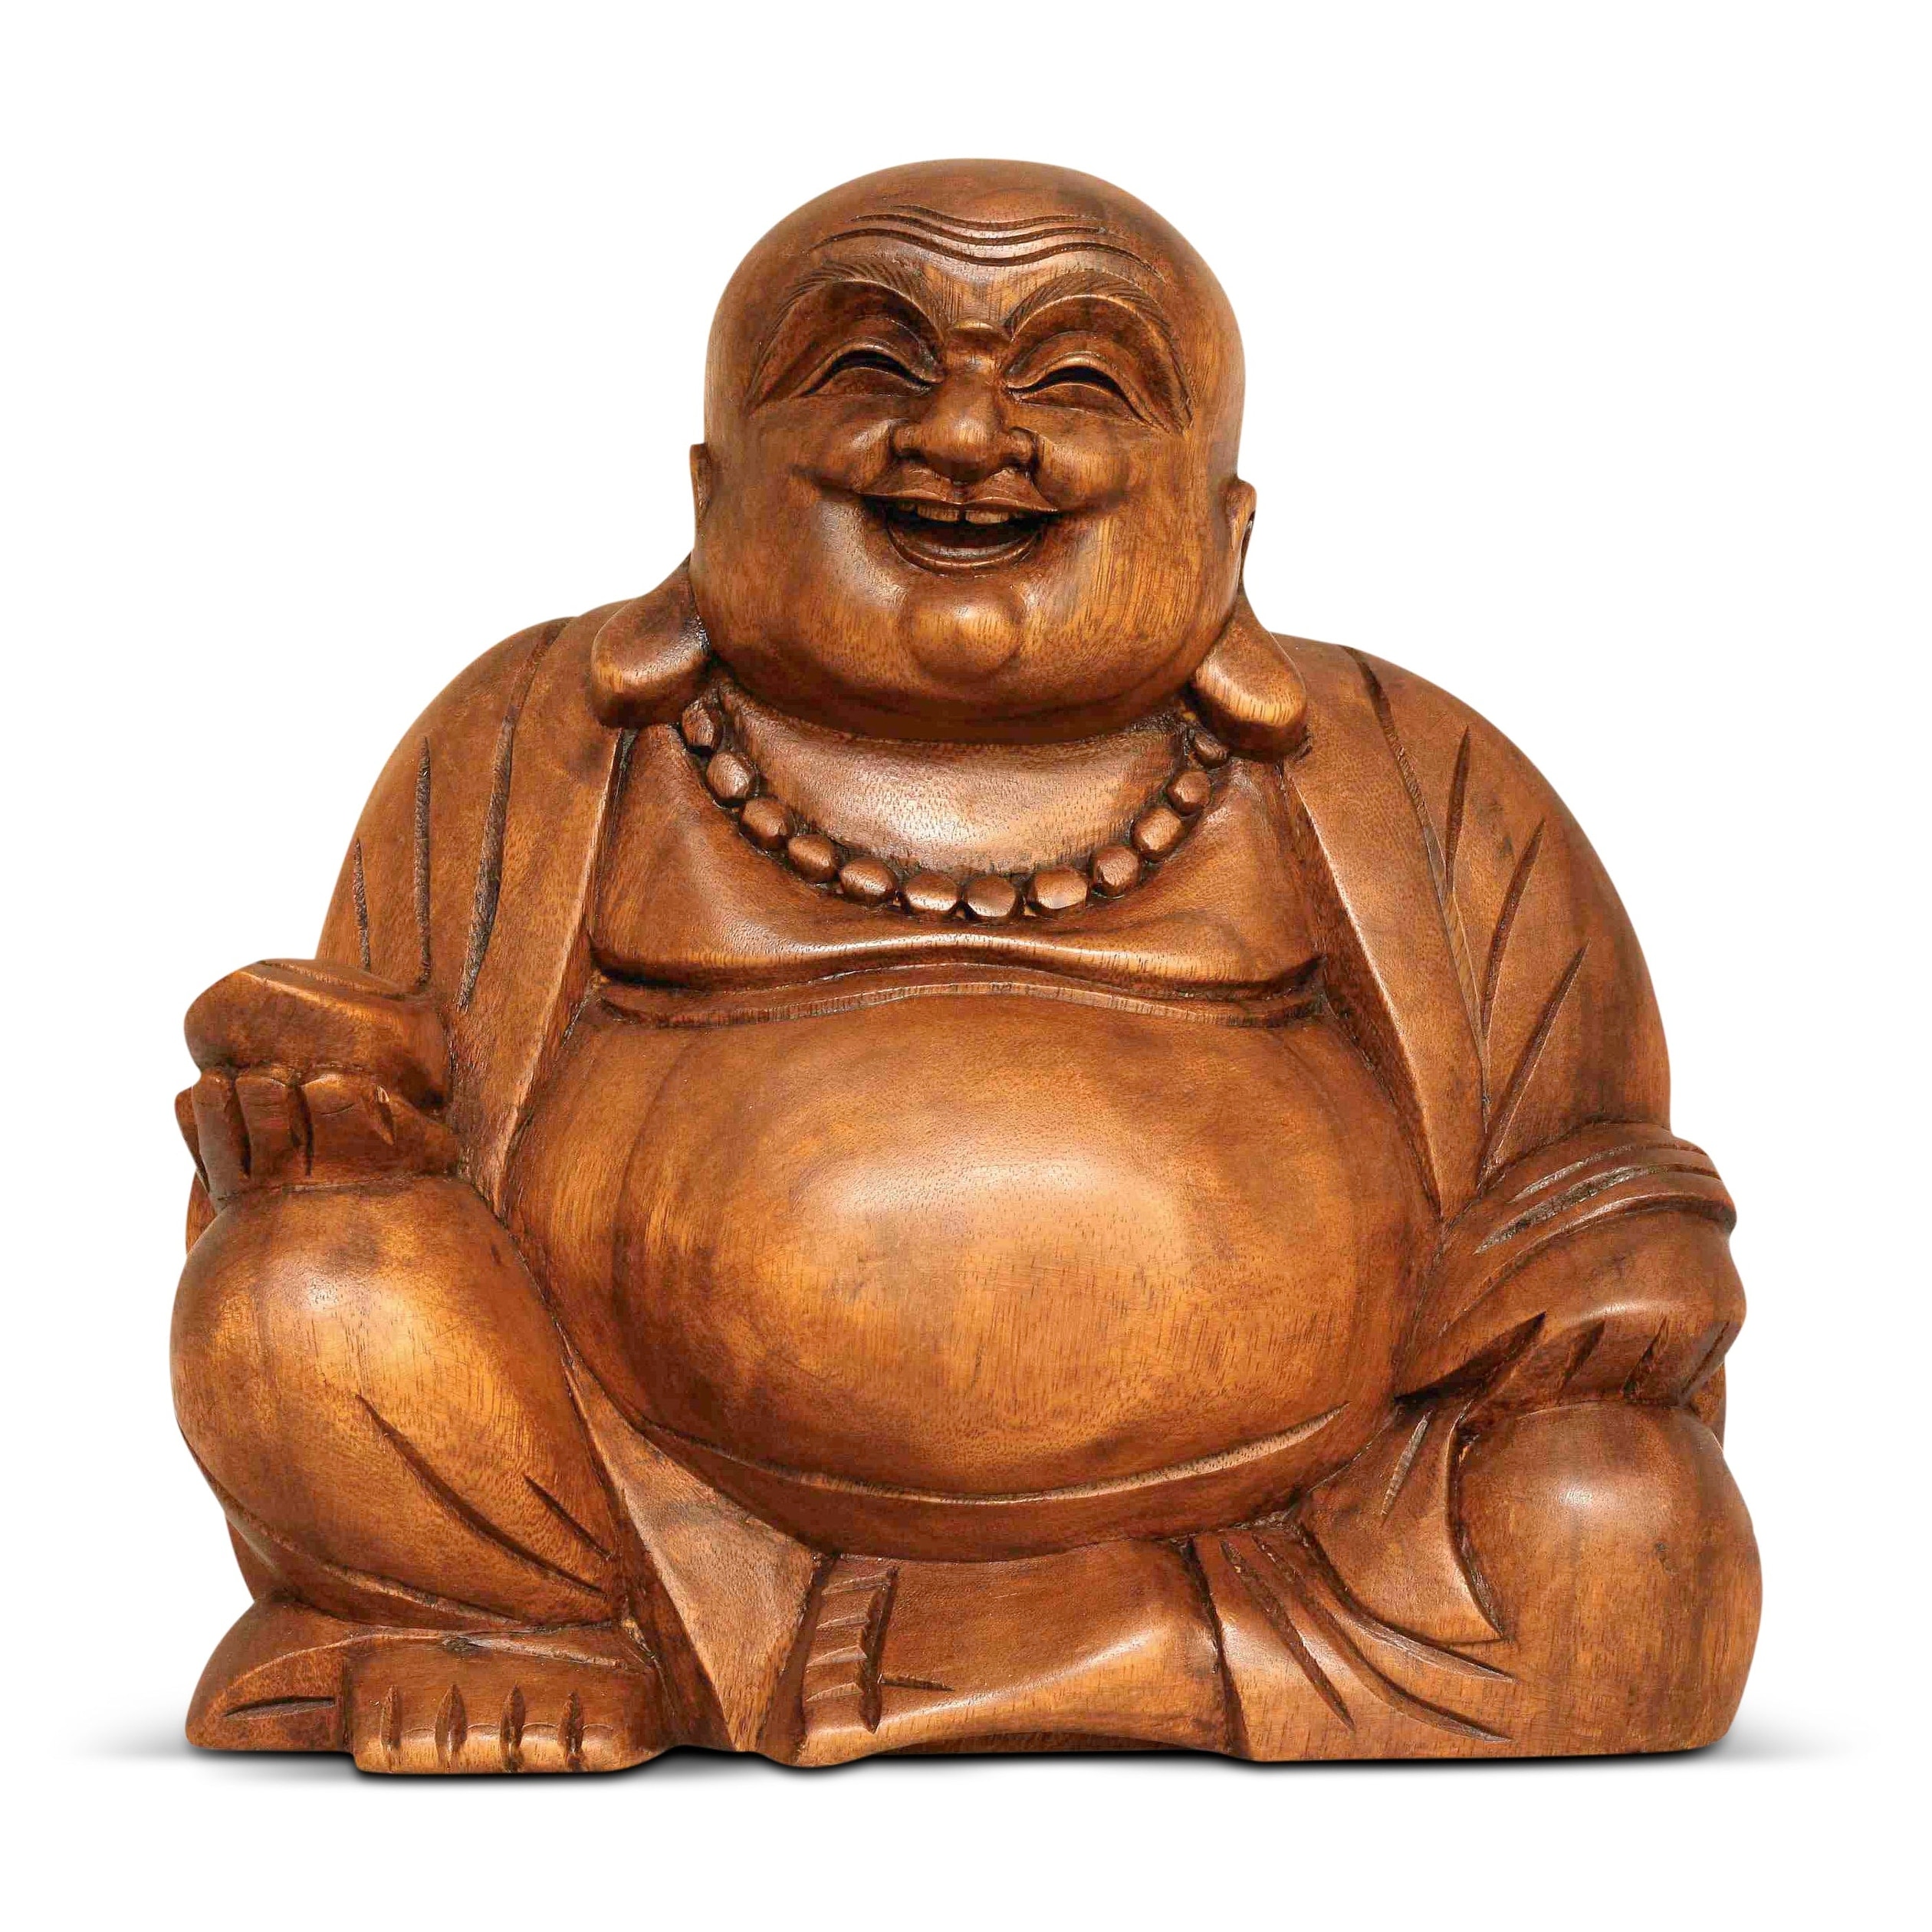 Wooden Laughing Happy Buddha Statue Hand Carved Smiling Sitting Sculpture Handmade Figurine Decorative Home Decor Handcrafted